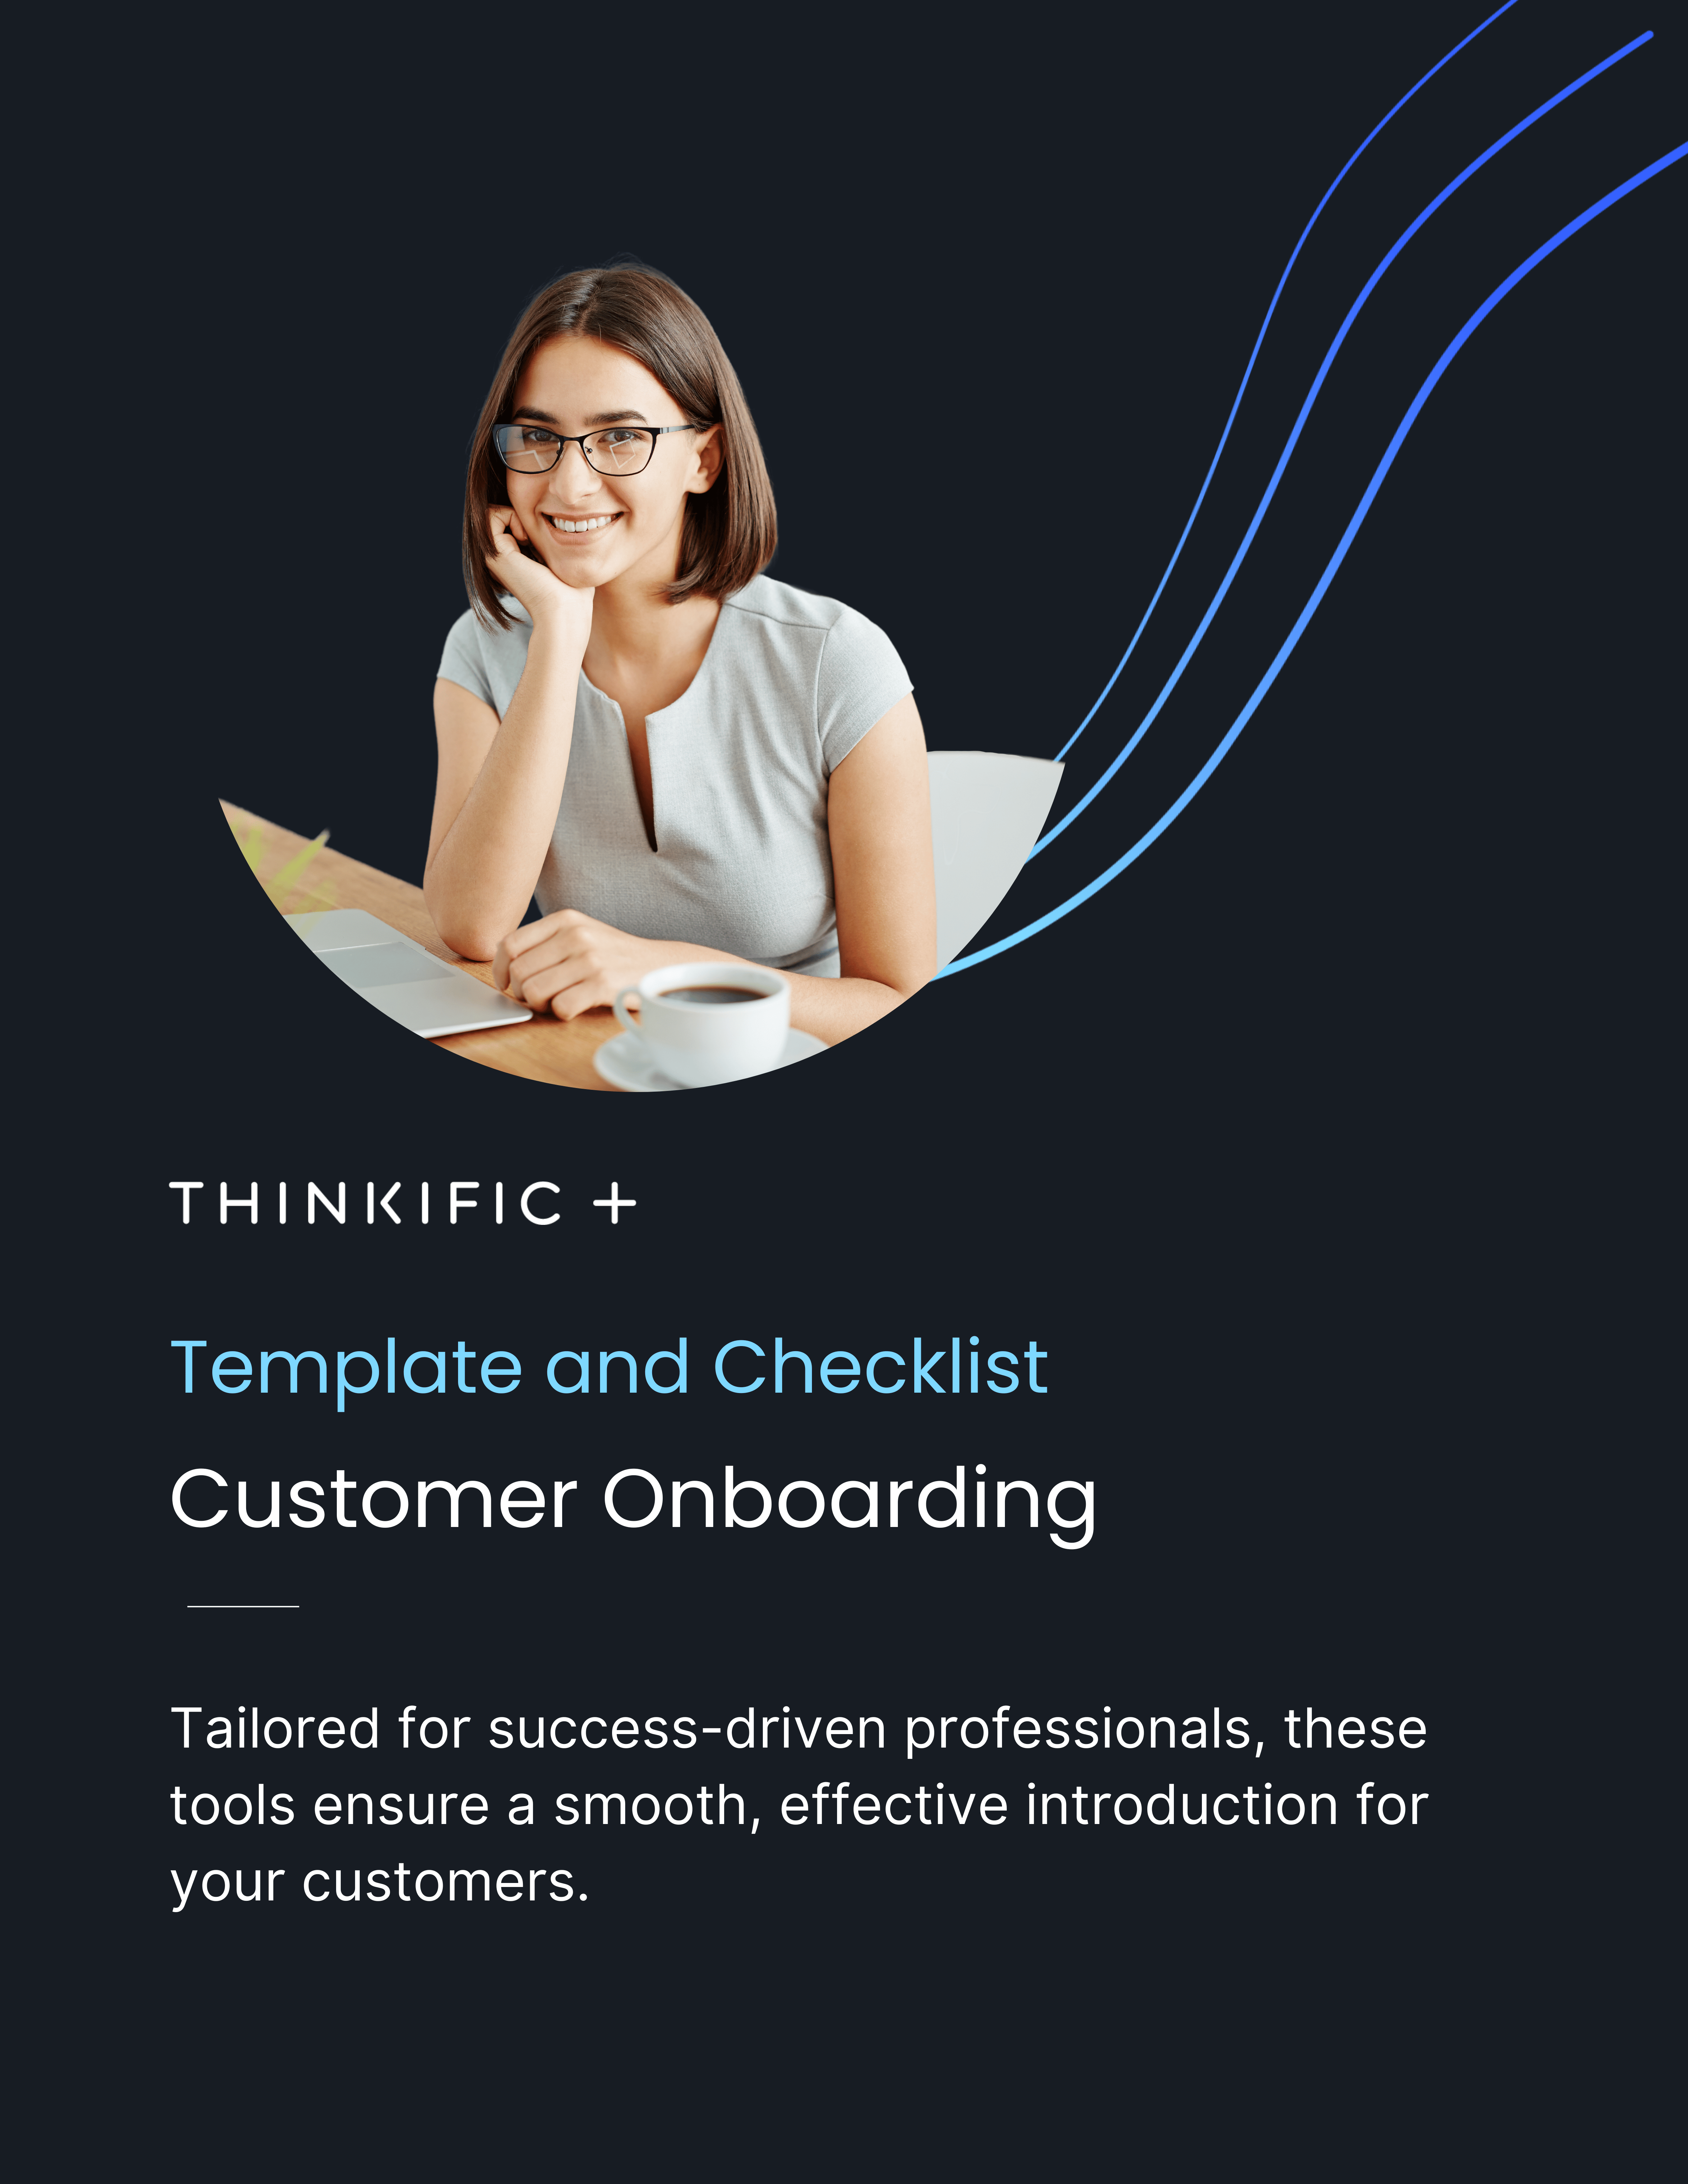 Free Customer Onboarding Templates + Checklist: Download Now